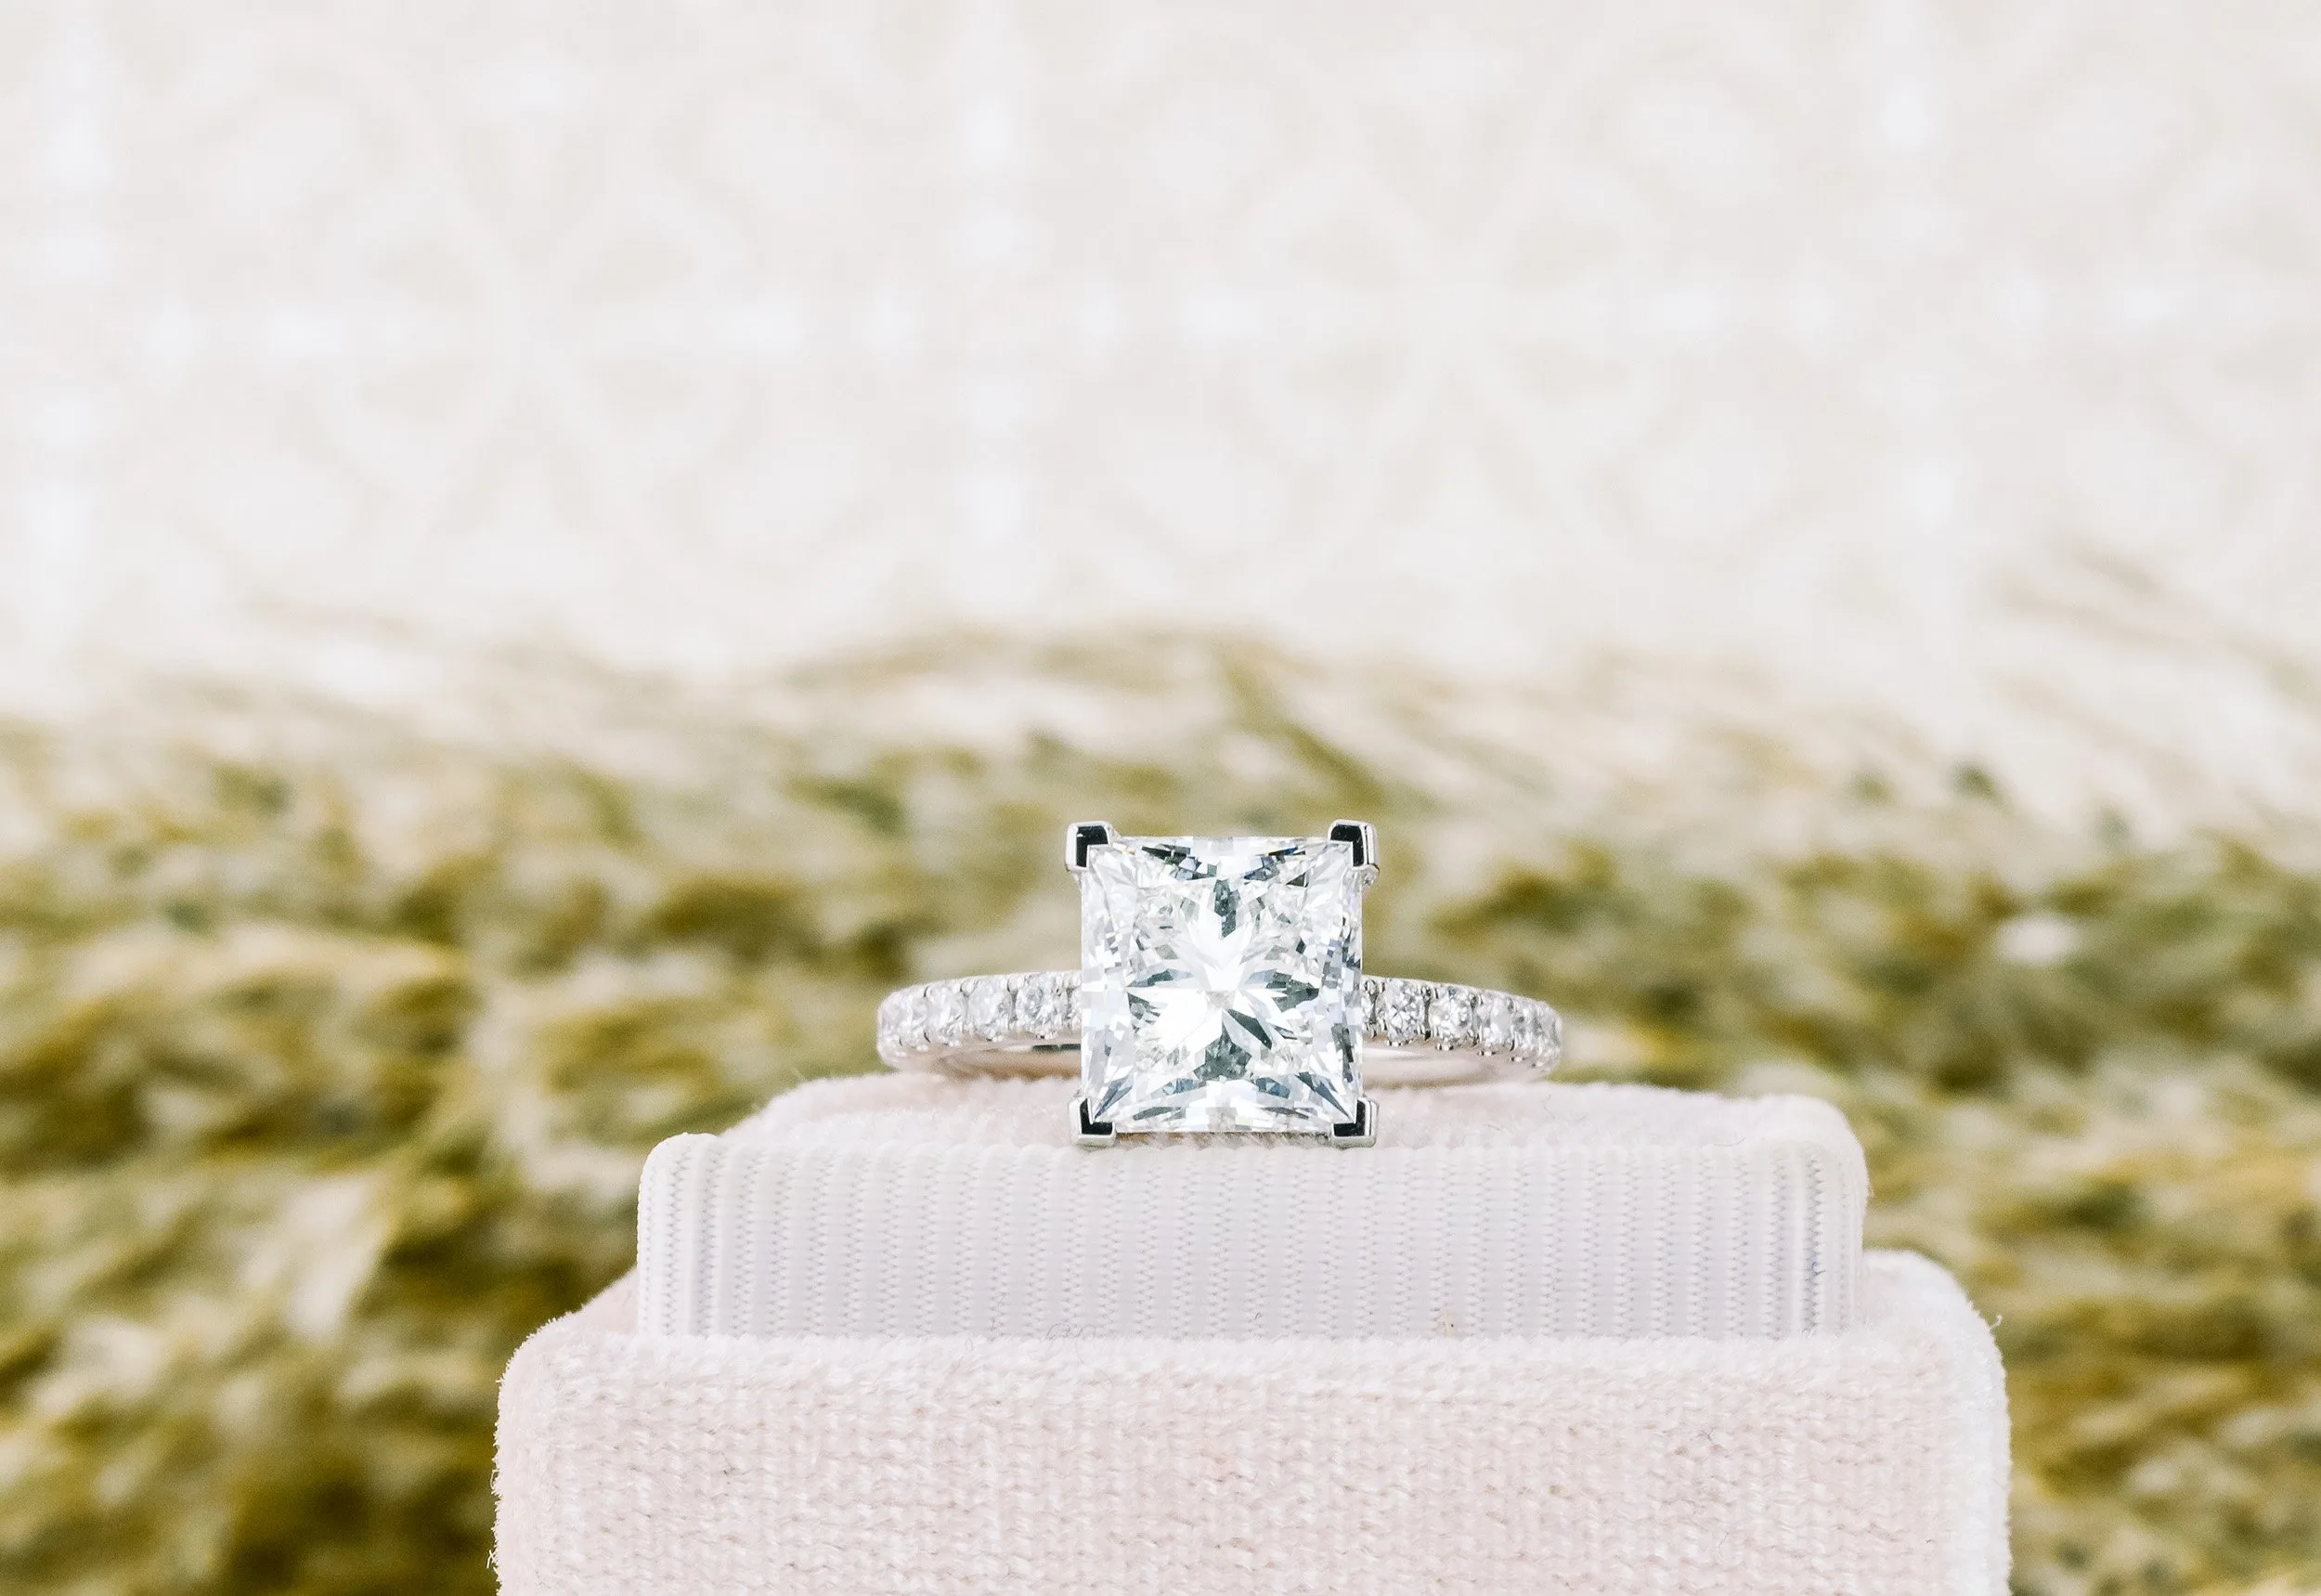 The Top 12 Designer Engagement Rings | Whiteflash